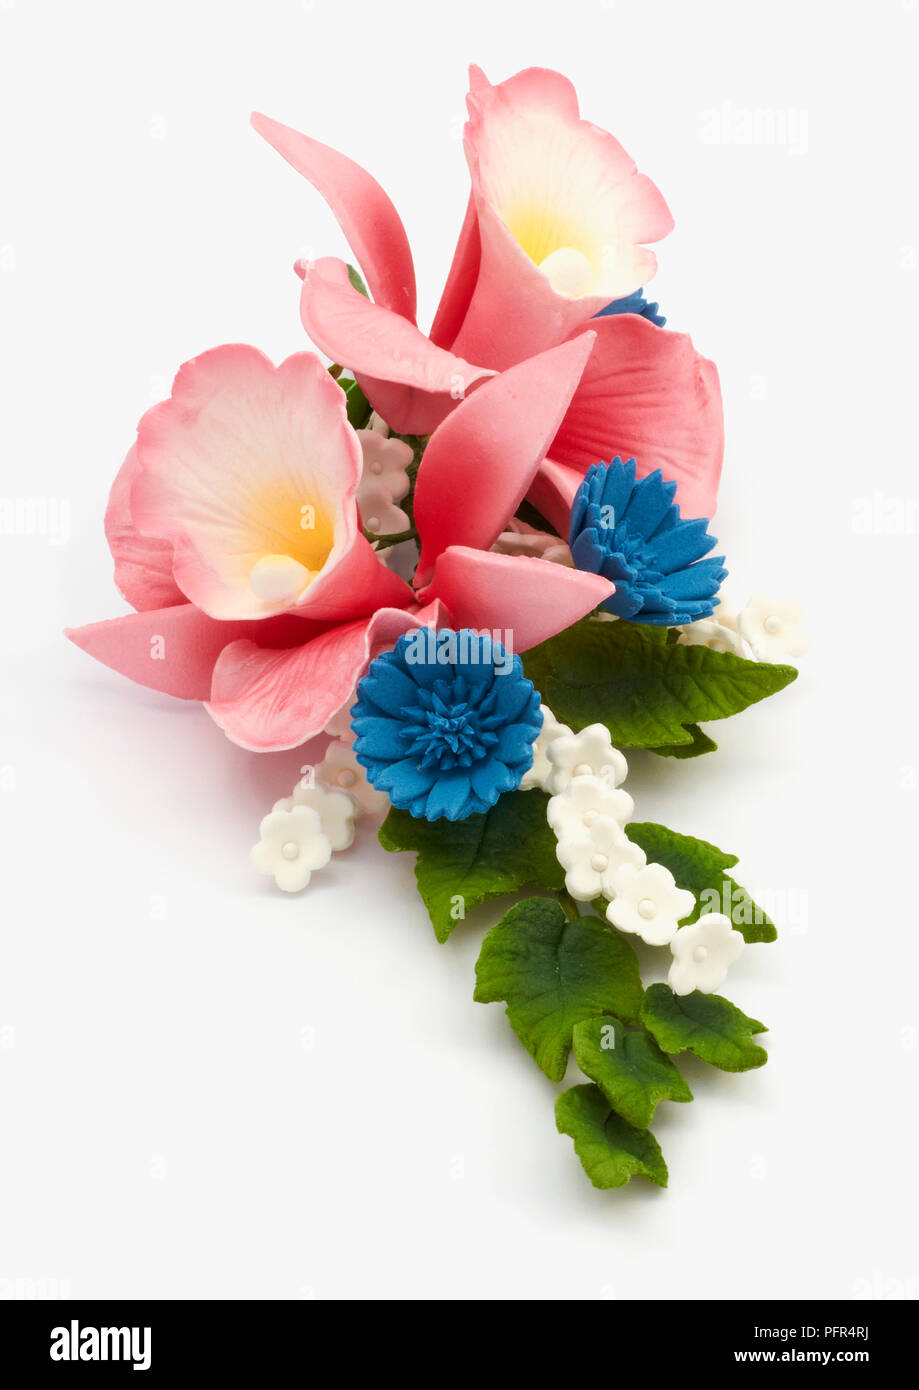 Orchids, cornflower and baby's breath cake decorations, edible Stock Photo